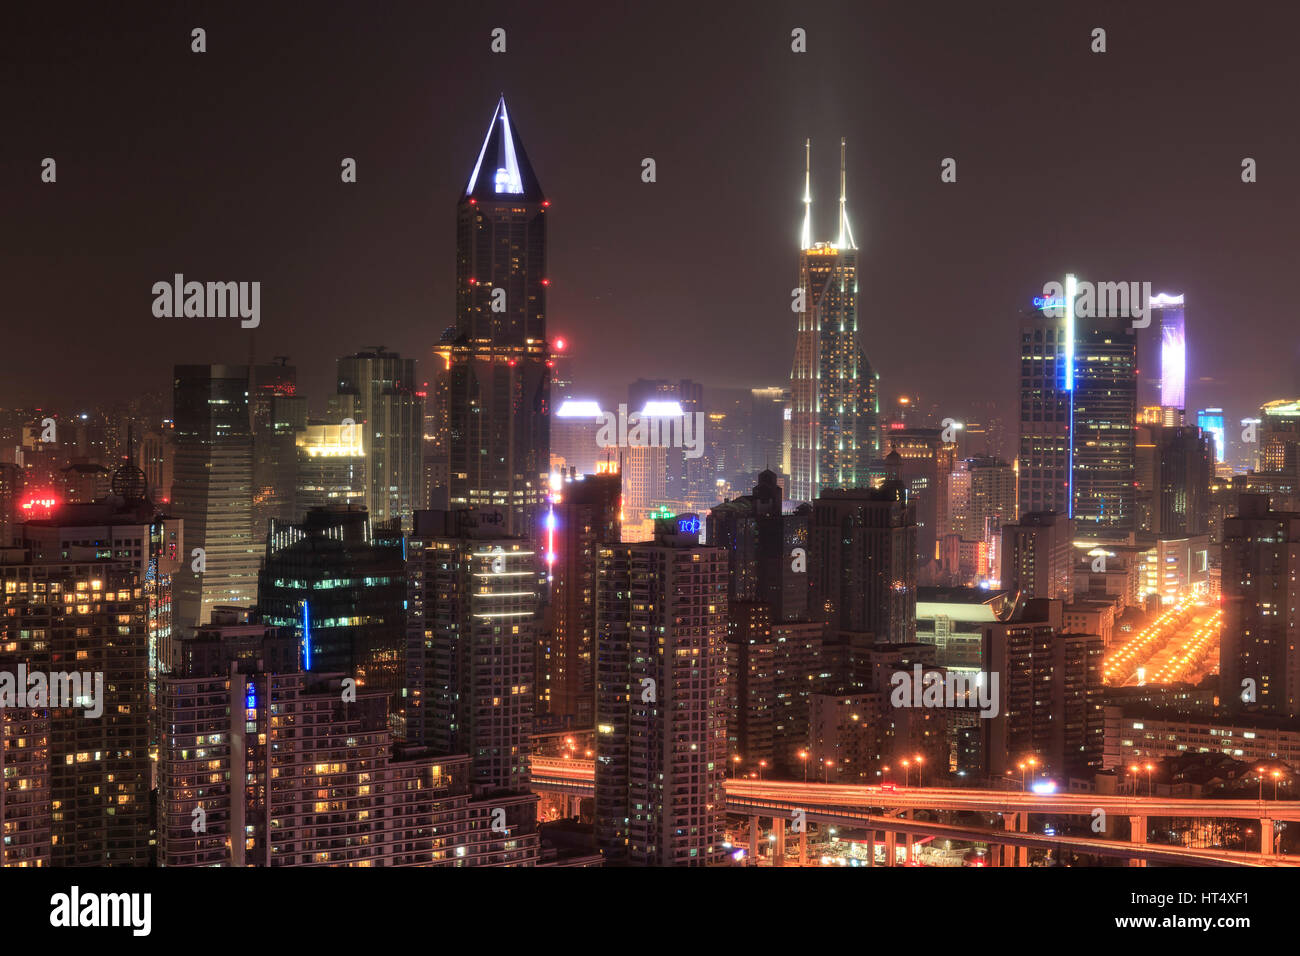 Shanghai, China - March 2, 2017: Shanghai skyline at night with the Shimao International Plaza and Tomorrow Square Towers on background Stock Photo